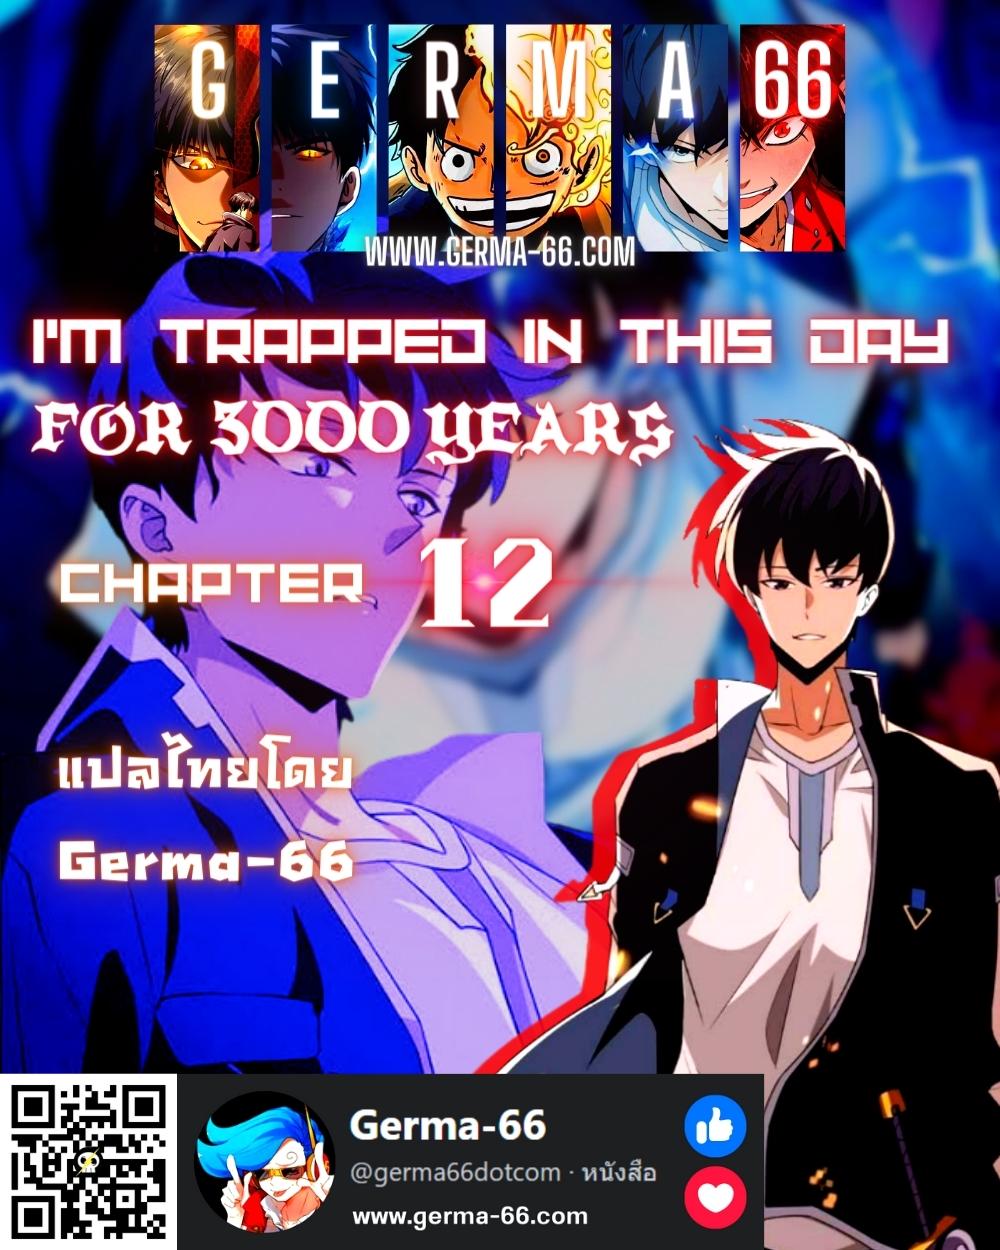 germa 66 trapped 3000 ep 12.01